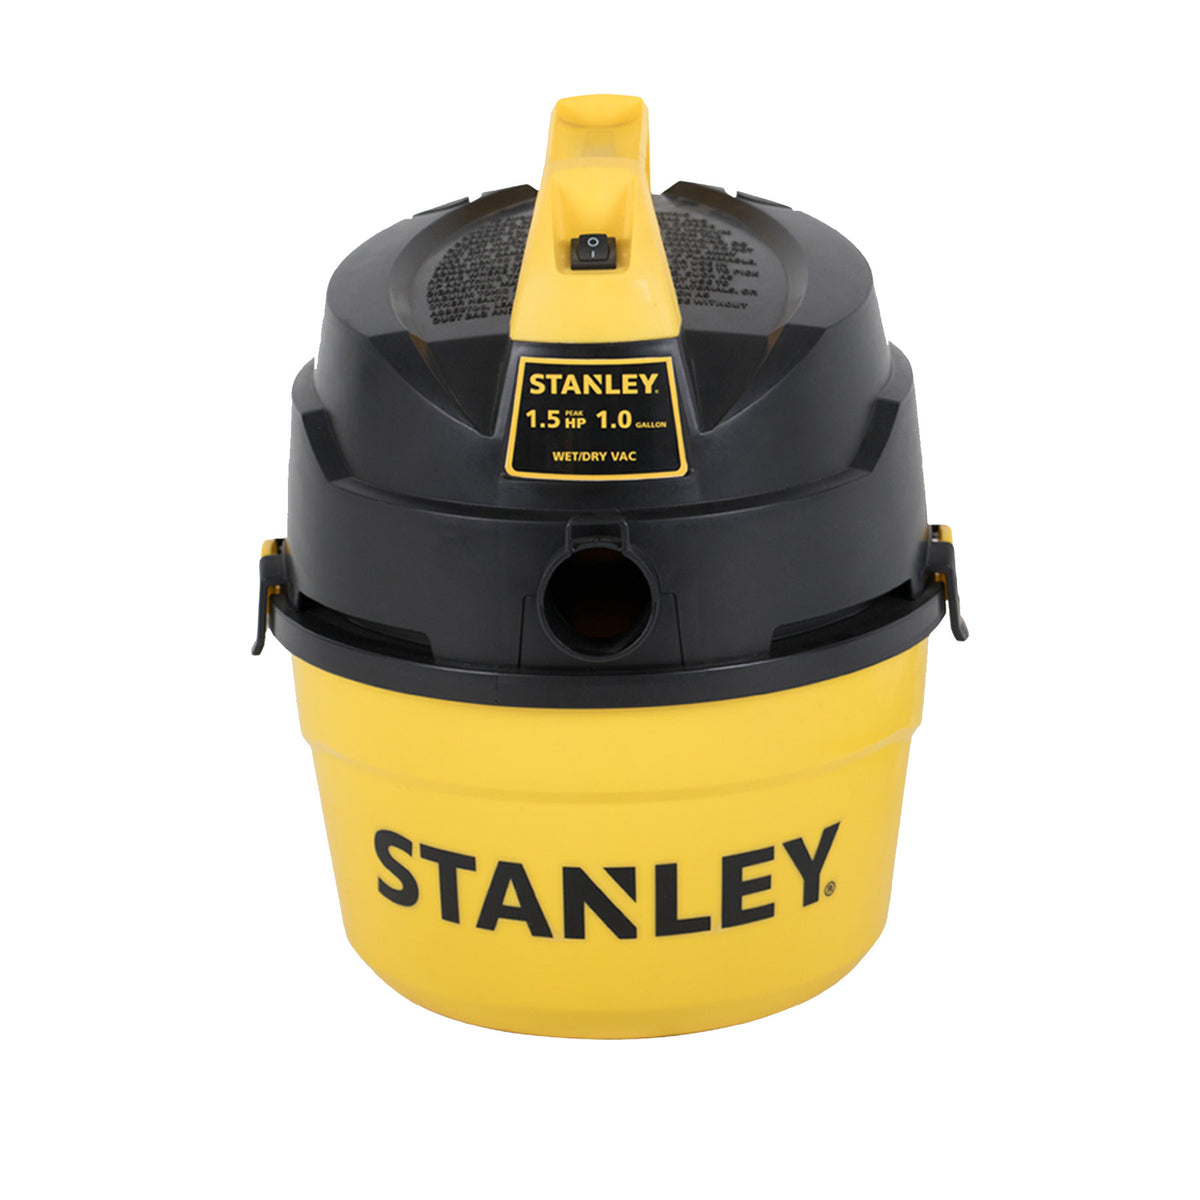 SL18101P-1H - STANLEY 1 Gallon 1.5 HP Wall Hanging Unit